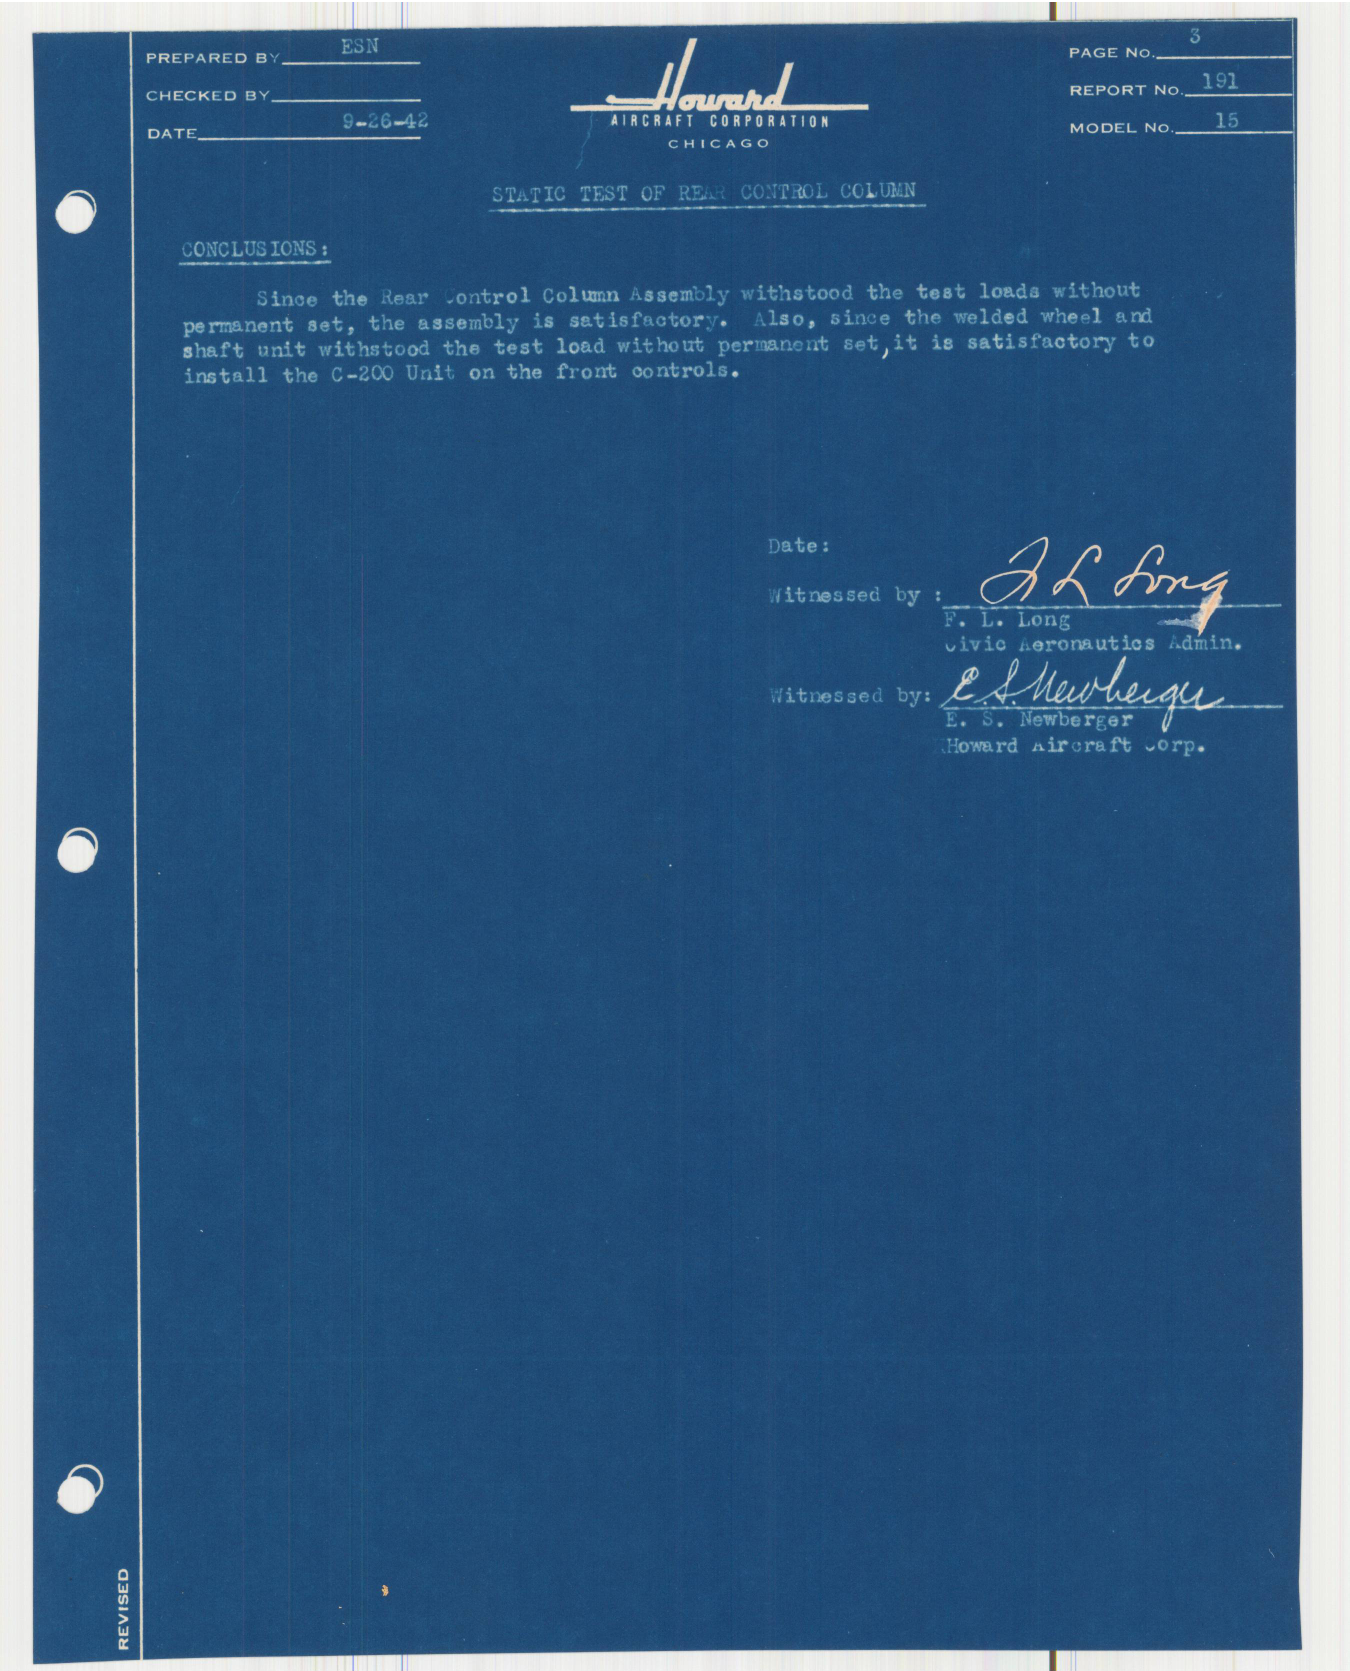 Sample page 4 from AirCorps Library document: Report 191, Static Test of Rear Control Column Assembly, DGA-15